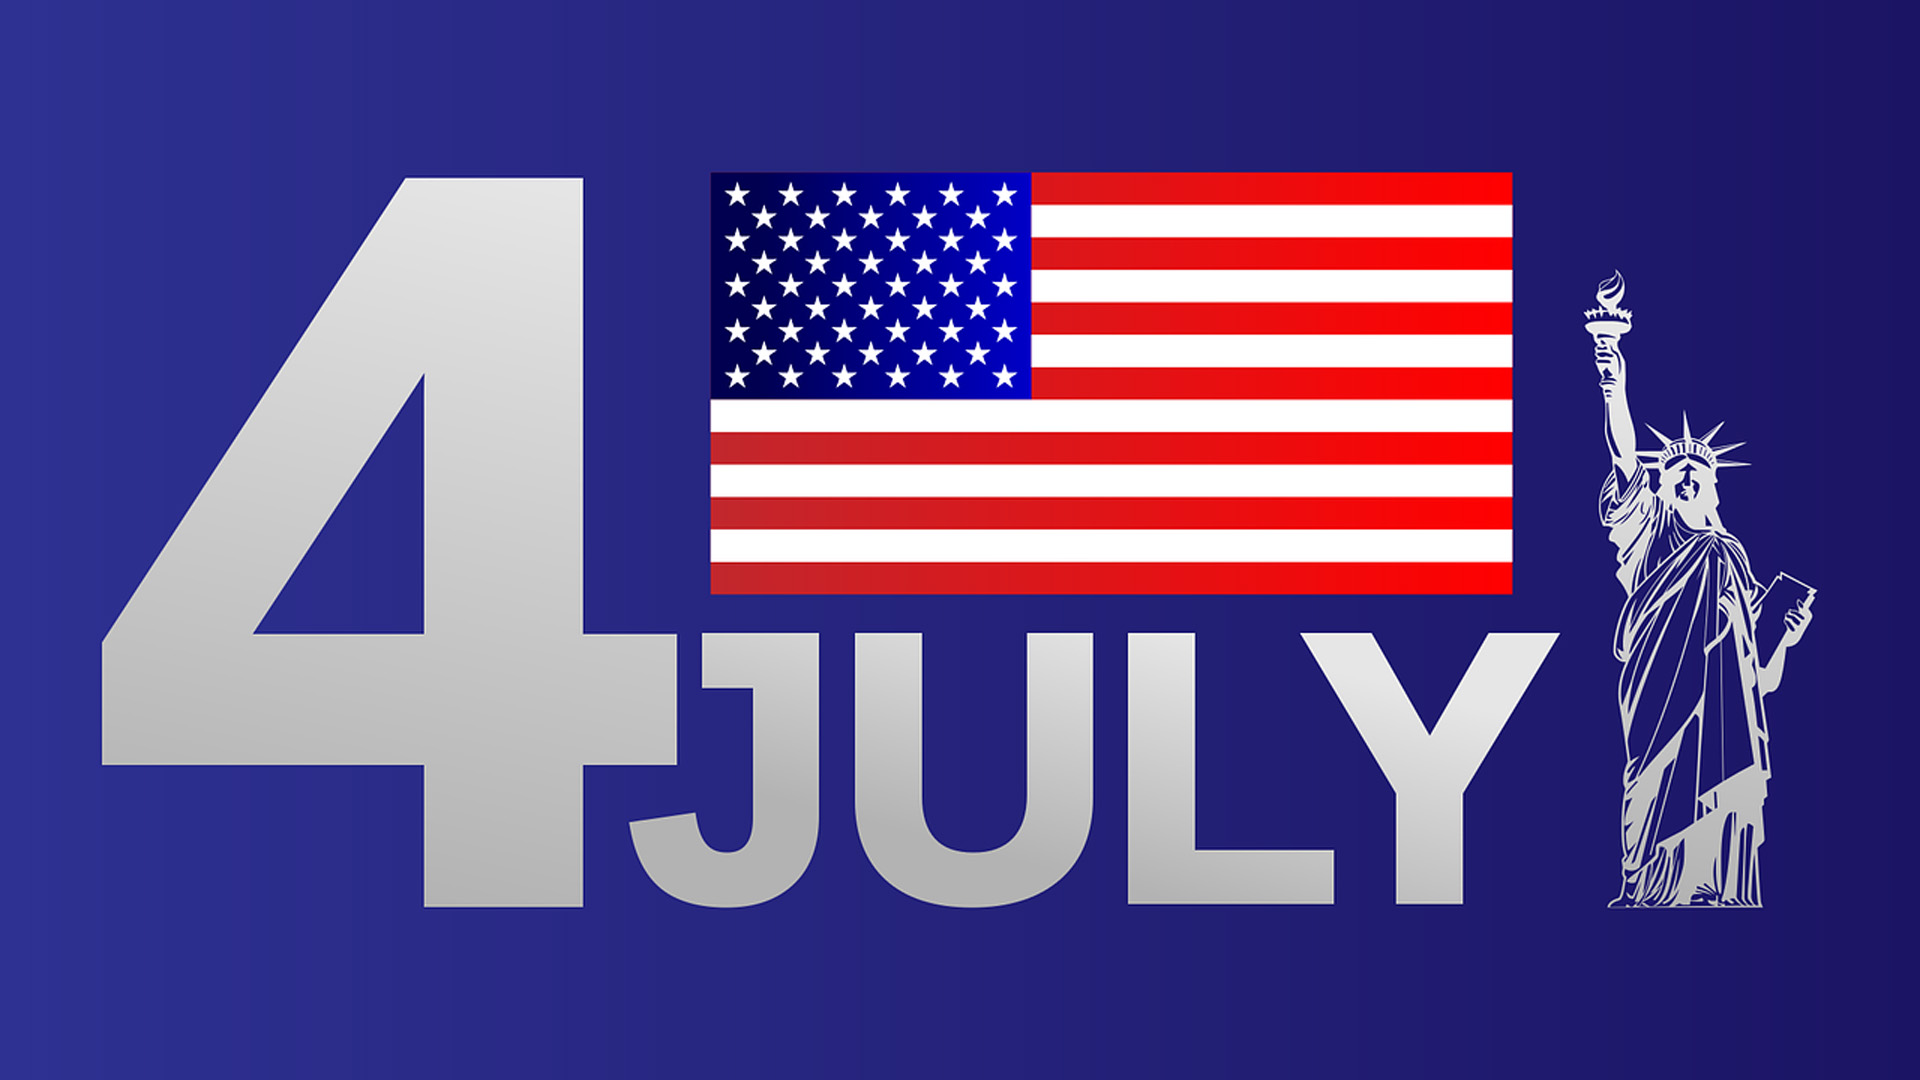 Navy blue gradient background. 4th [USA FLAG] July is written in a bold gray gradient font stacked on top one another. There is a outlined illustration of the Statue of Liberty on the right of the graphic.